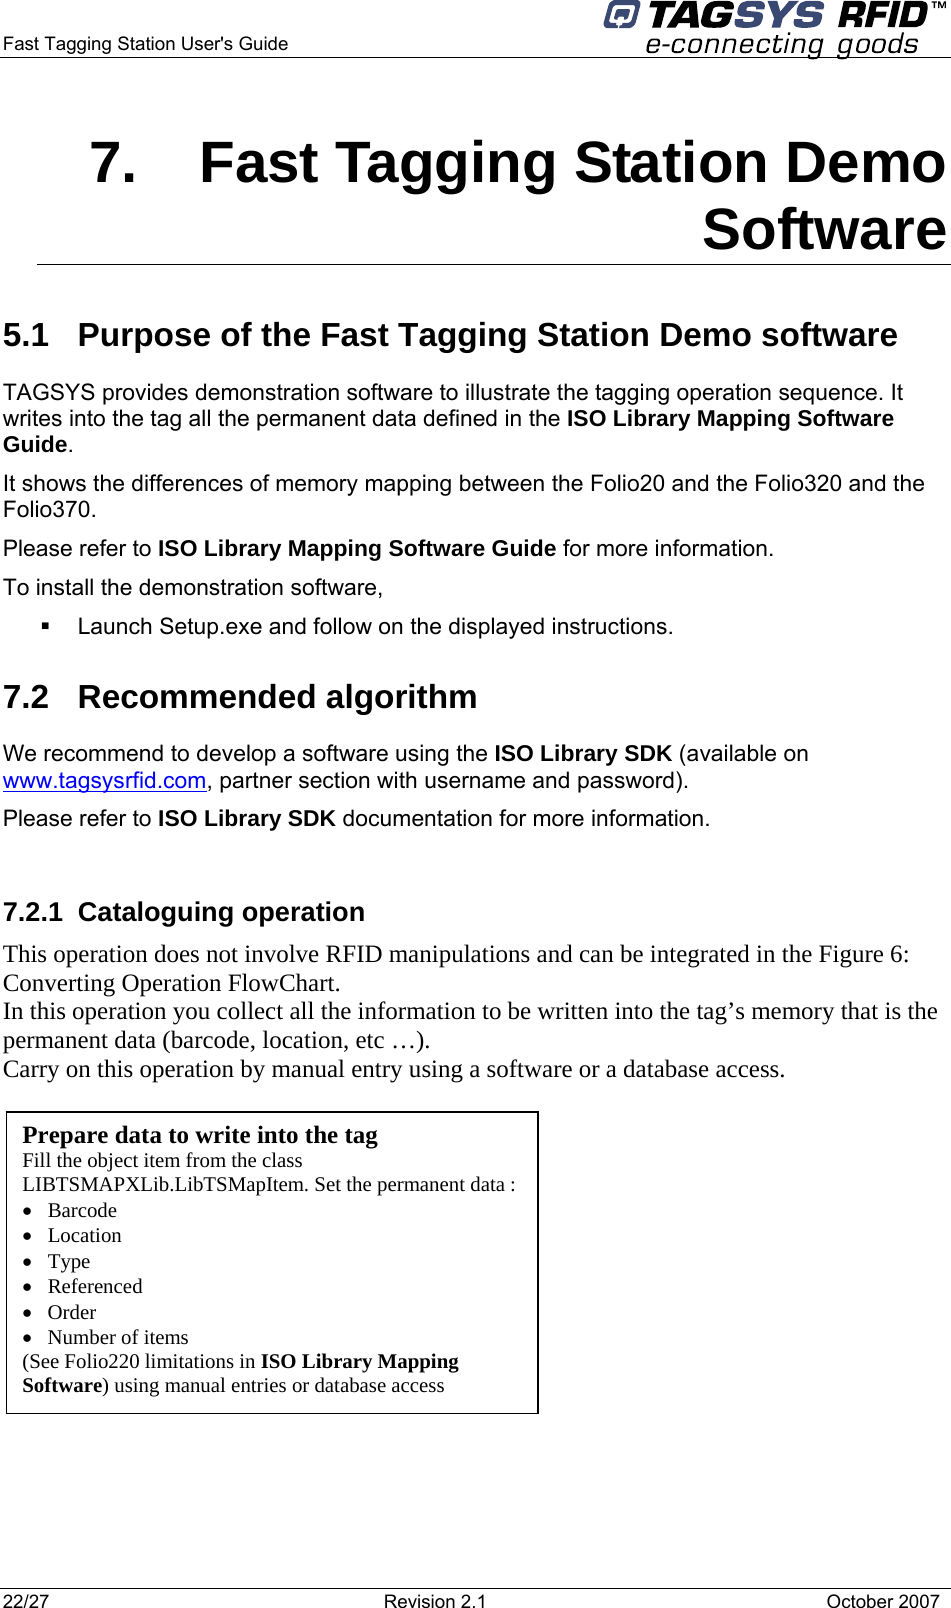  Fast Tagging Station User&apos;s Guide      7.  Fast Tagging Station Demo Software 5.1  Purpose of the Fast Tagging Station Demo software TAGSYS provides demonstration software to illustrate the tagging operation sequence. It writes into the tag all the permanent data defined in the ISO Library Mapping Software Guide. It shows the differences of memory mapping between the Folio20 and the Folio320 and the Folio370. Please refer to ISO Library Mapping Software Guide for more information. To install the demonstration software,   Launch Setup.exe and follow on the displayed instructions. 7.2 Recommended algorithm We recommend to develop a software using the ISO Library SDK (available on www.tagsysrfid.com, partner section with username and password). Please refer to ISO Library SDK documentation for more information.  7.2.1 Cataloguing operation This operation does not involve RFID manipulations and can be integrated in the Figure 6: Converting Operation FlowChart. In this operation you collect all the information to be written into the tag’s memory that is the permanent data (barcode, location, etc …). Carry on this operation by manual entry using a software or a database access.            Prepare data to write into the tag Fill the object item from the class LIBTSMAPXLib.LibTSMapItem. Set the permanent data : •   Barcode  •   Location •   Type •   Referenced •   Order •   Number of items (See Folio220 limitations in ISO Library Mapping  Software) using manual entries or database access     22/27  Revision 2.1   October 2007 